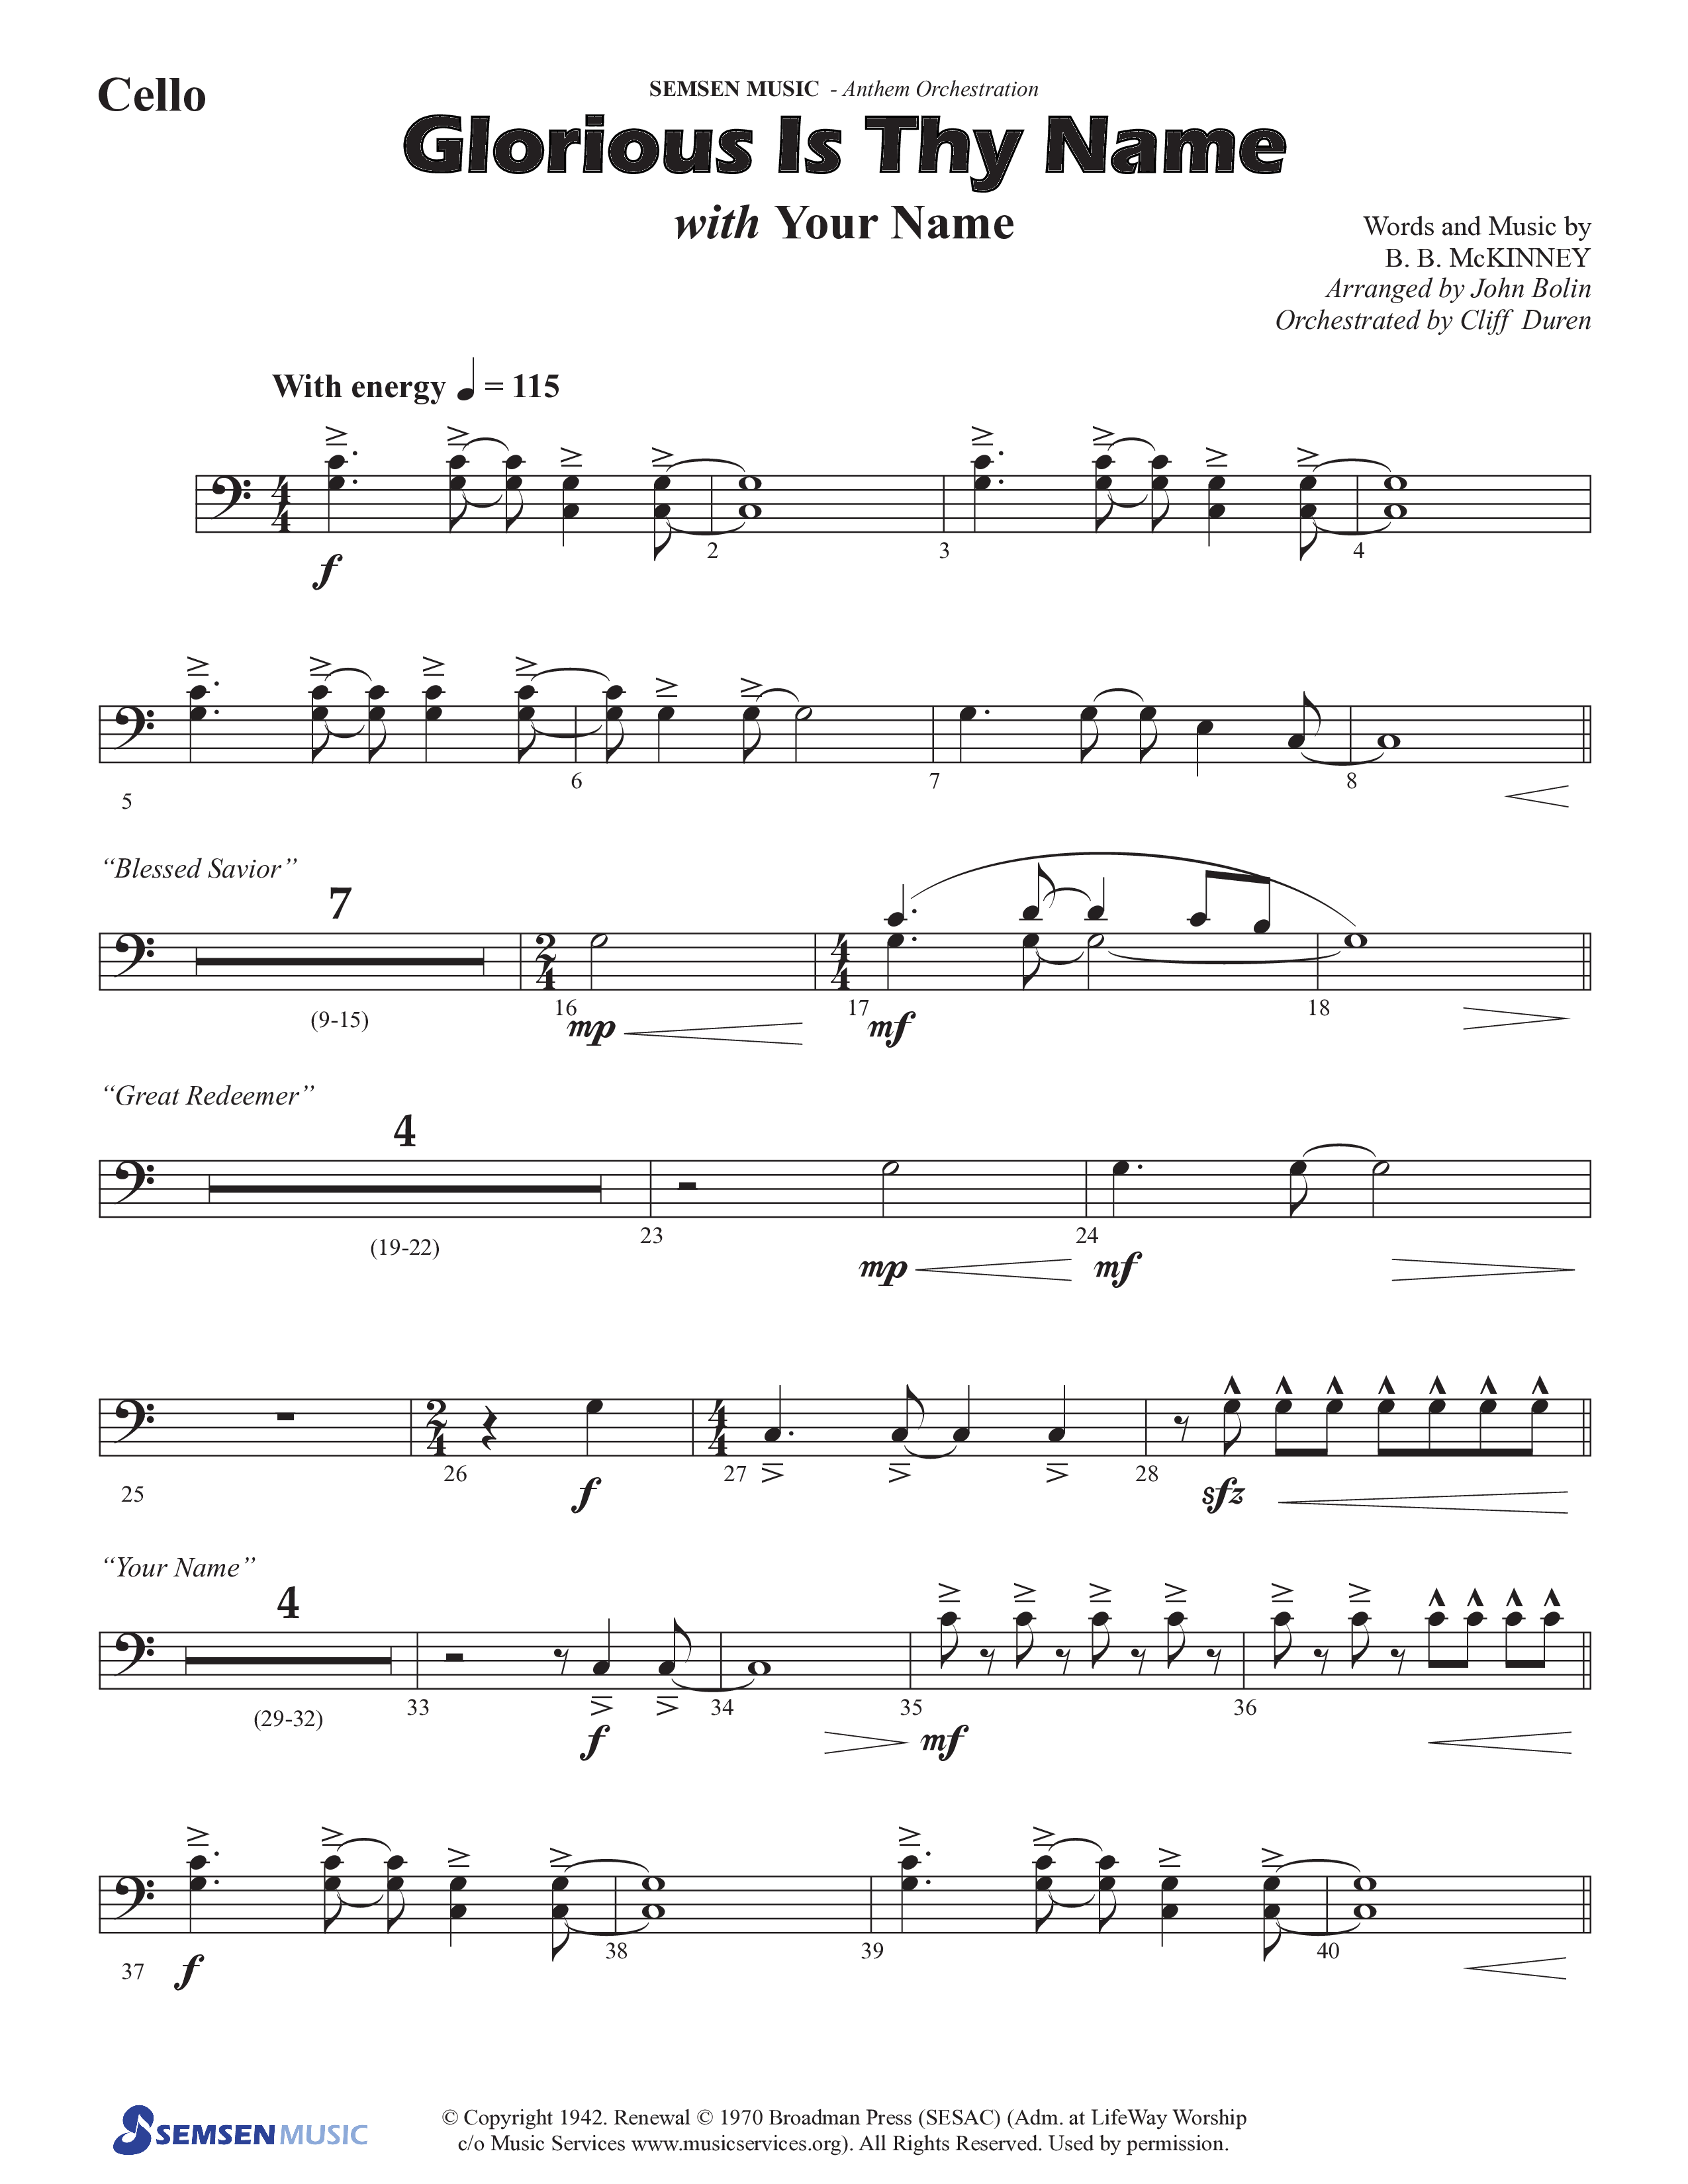 Glorious Is Thy Name (with Your Name) (Choral Anthem SATB) Cello (Semsen Music / Arr. John Bolin / Orch. Cliff Duren)